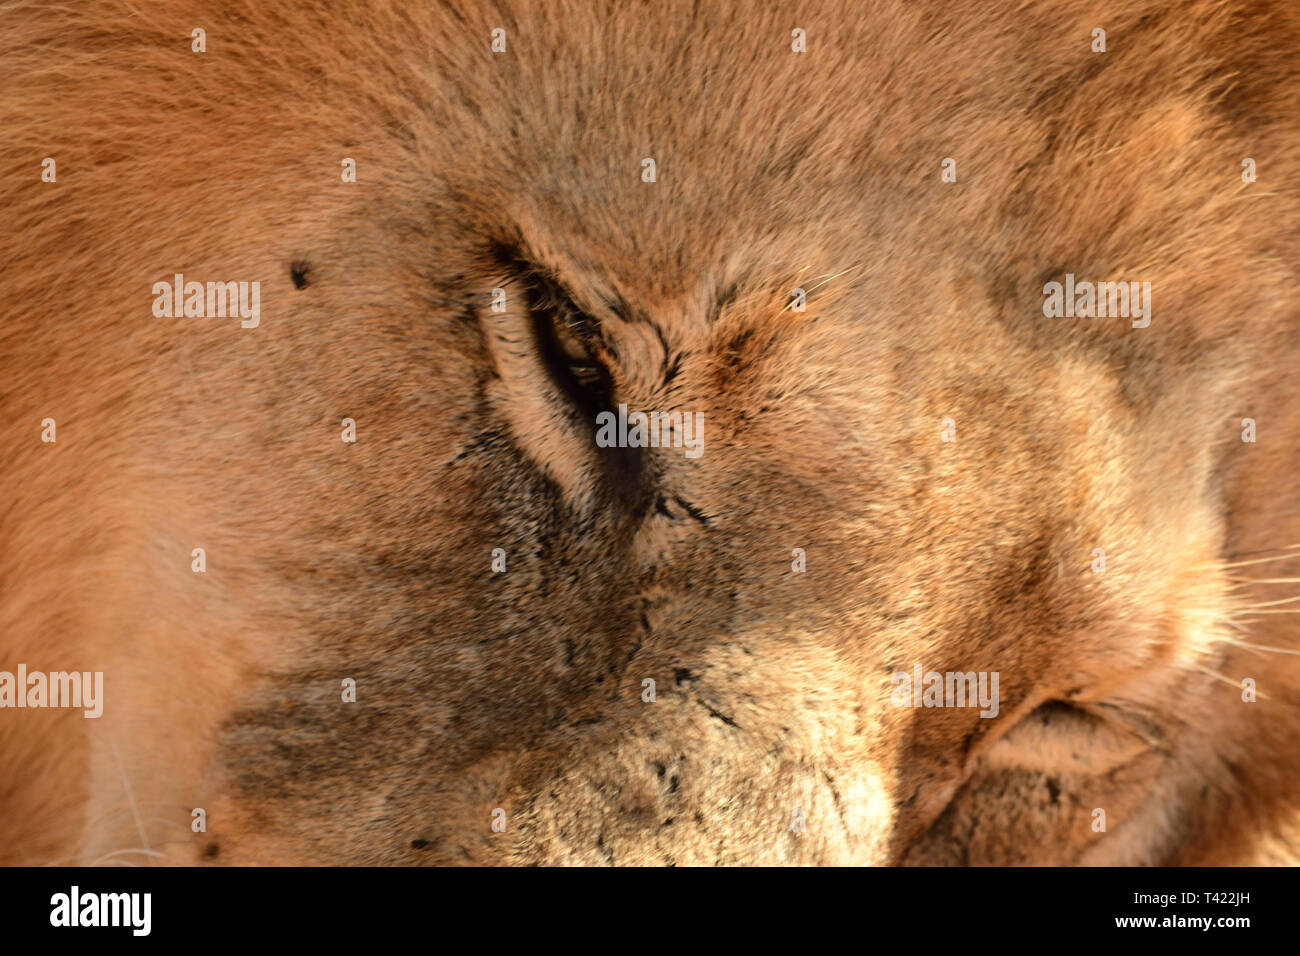 Close up of Lion's face Stock Photo